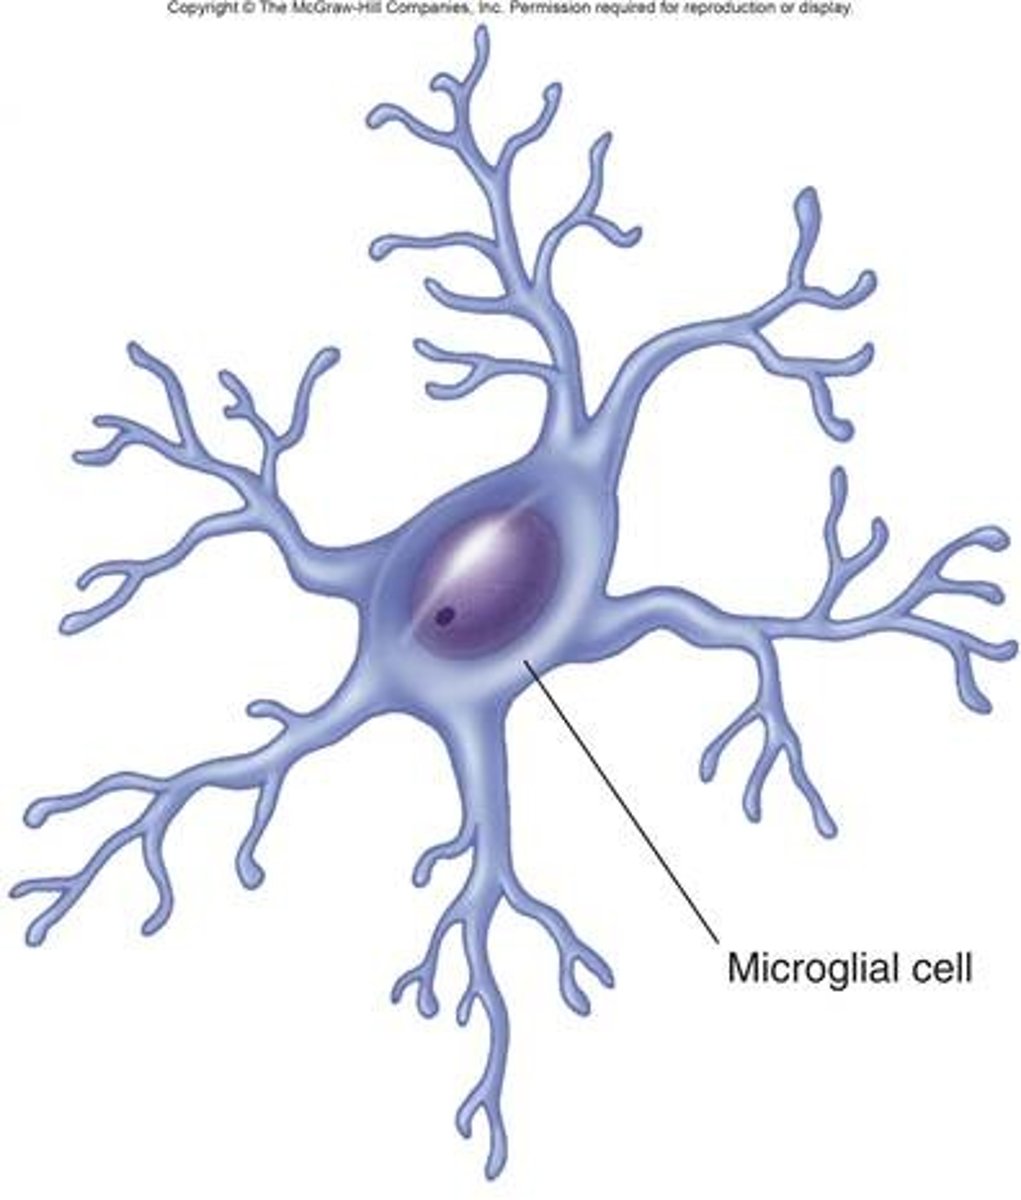 <p>Primary Immune defense of CNS. Similar to macrophages, phagocytize neuronal debris and neuromodulate functions.</p>